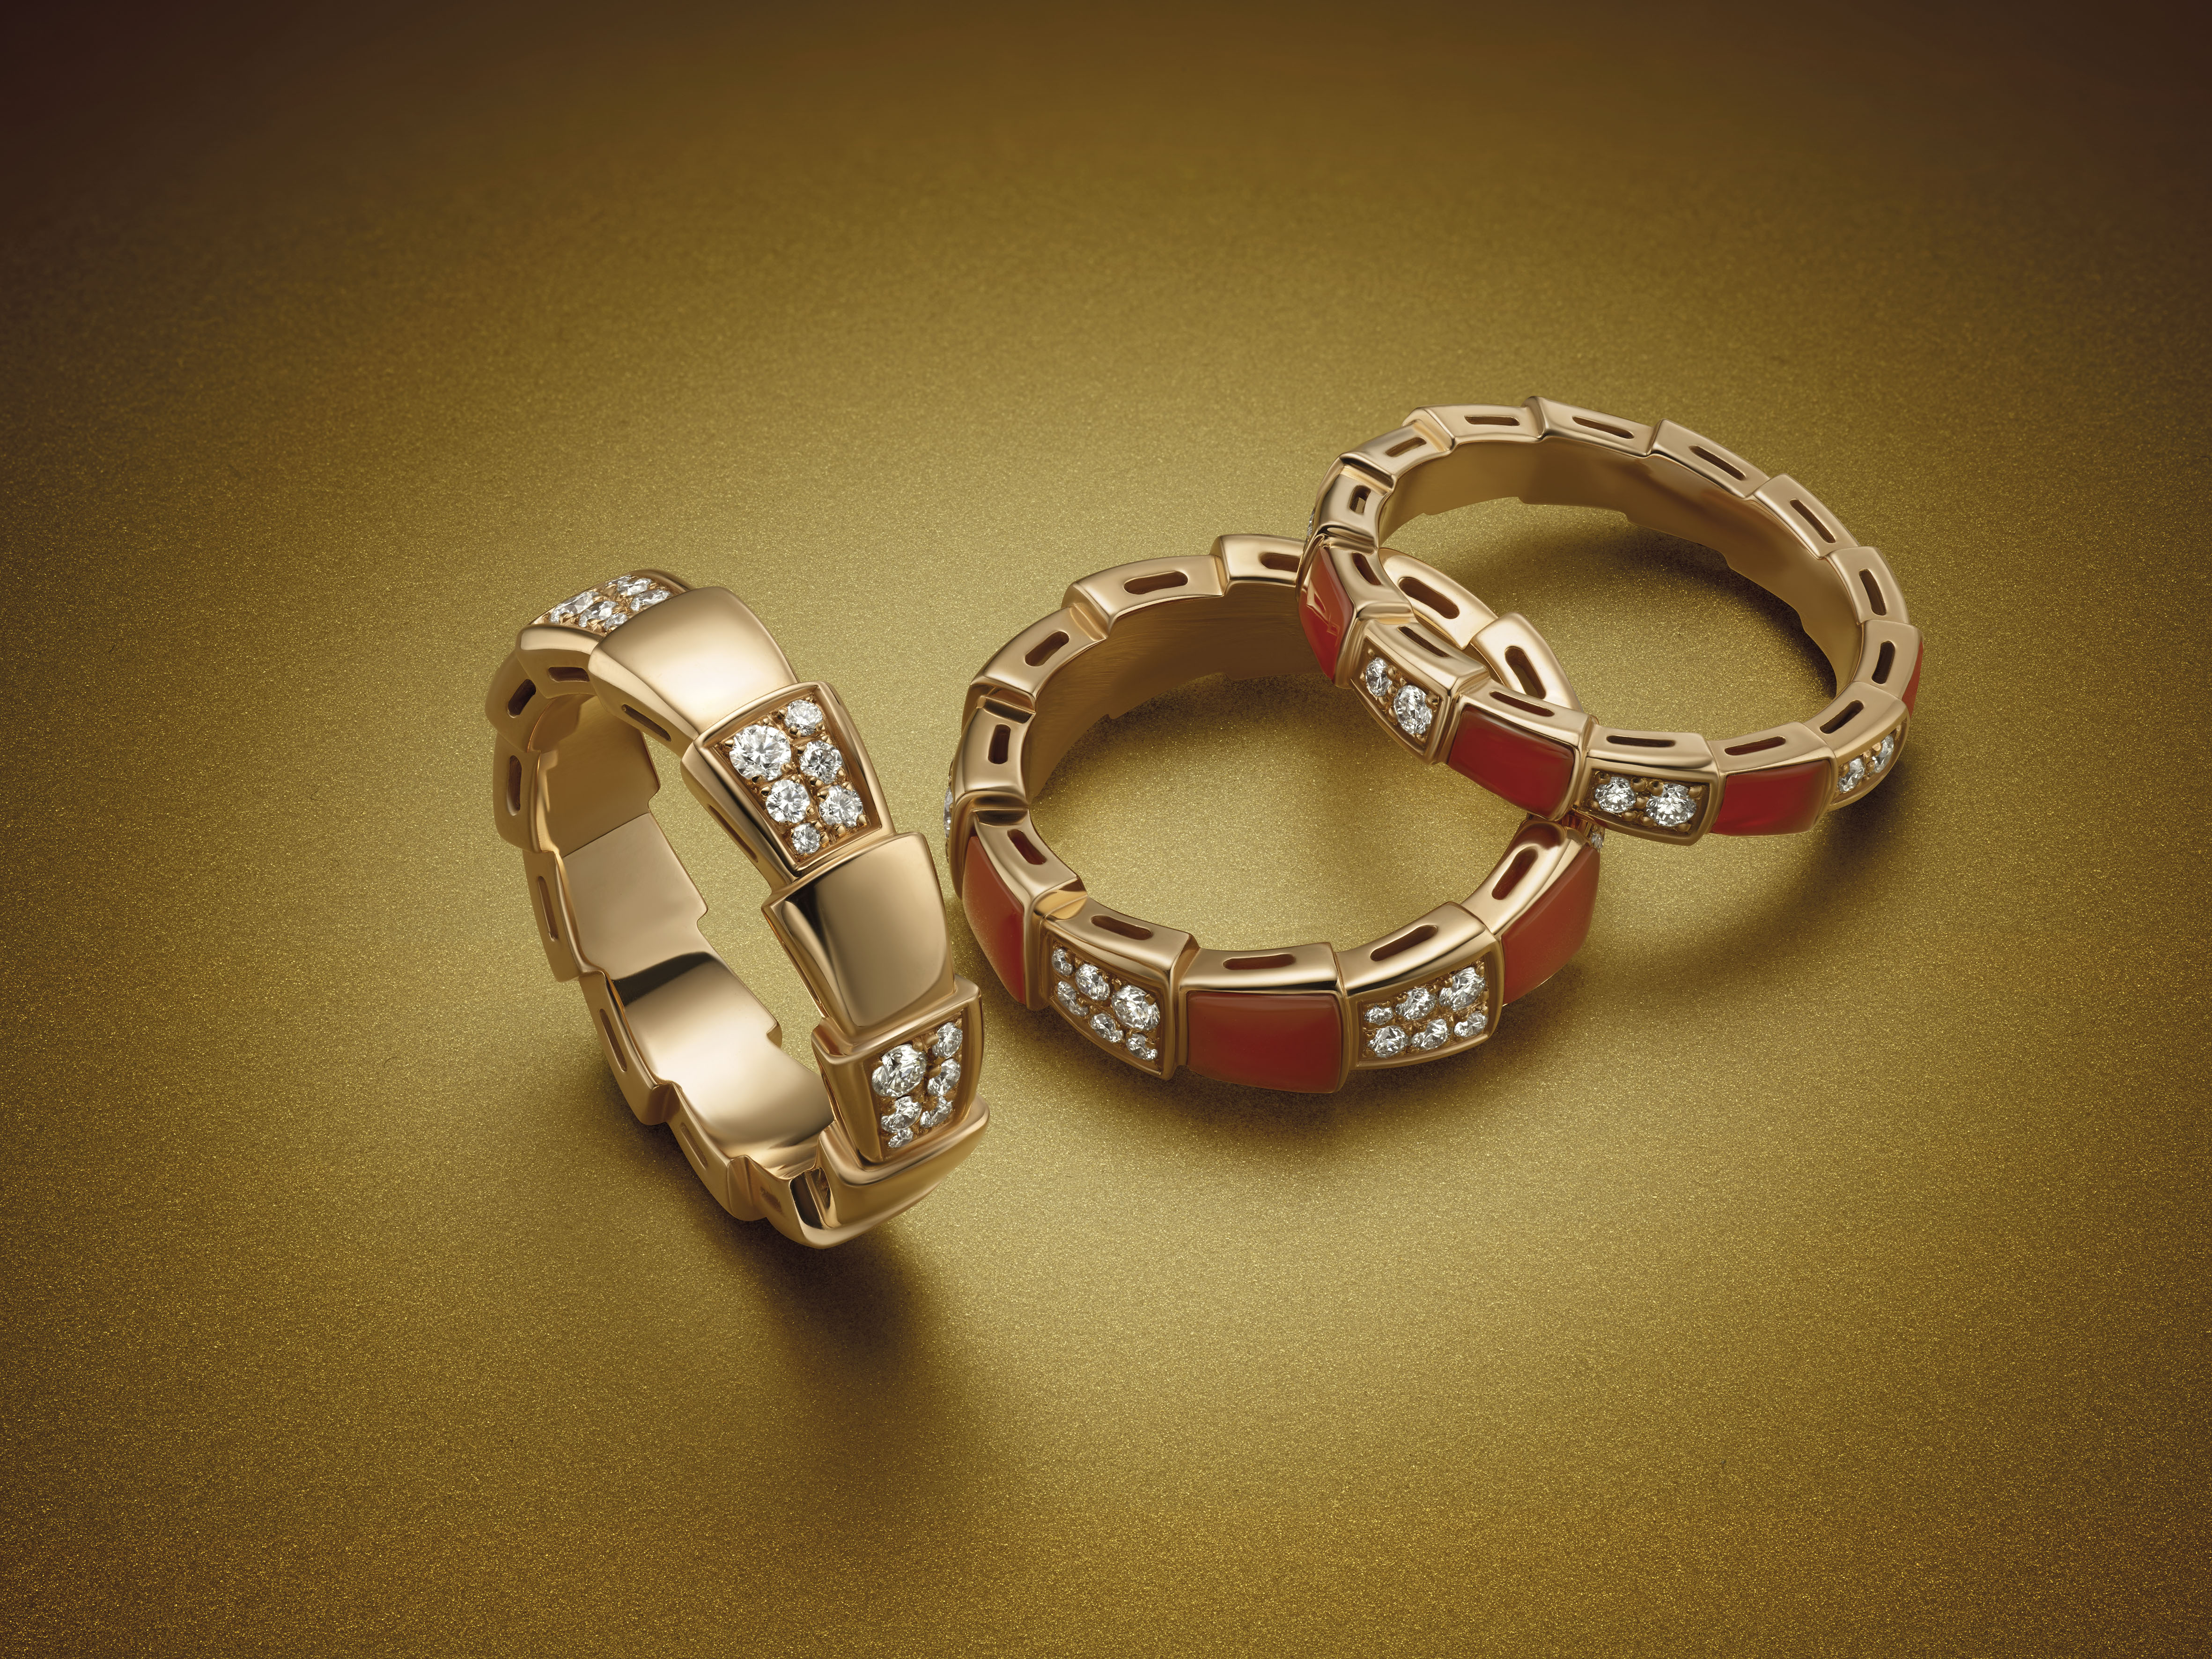 On the rocks: These Bulgari Serpenti Viper rings will slither their way into your heart